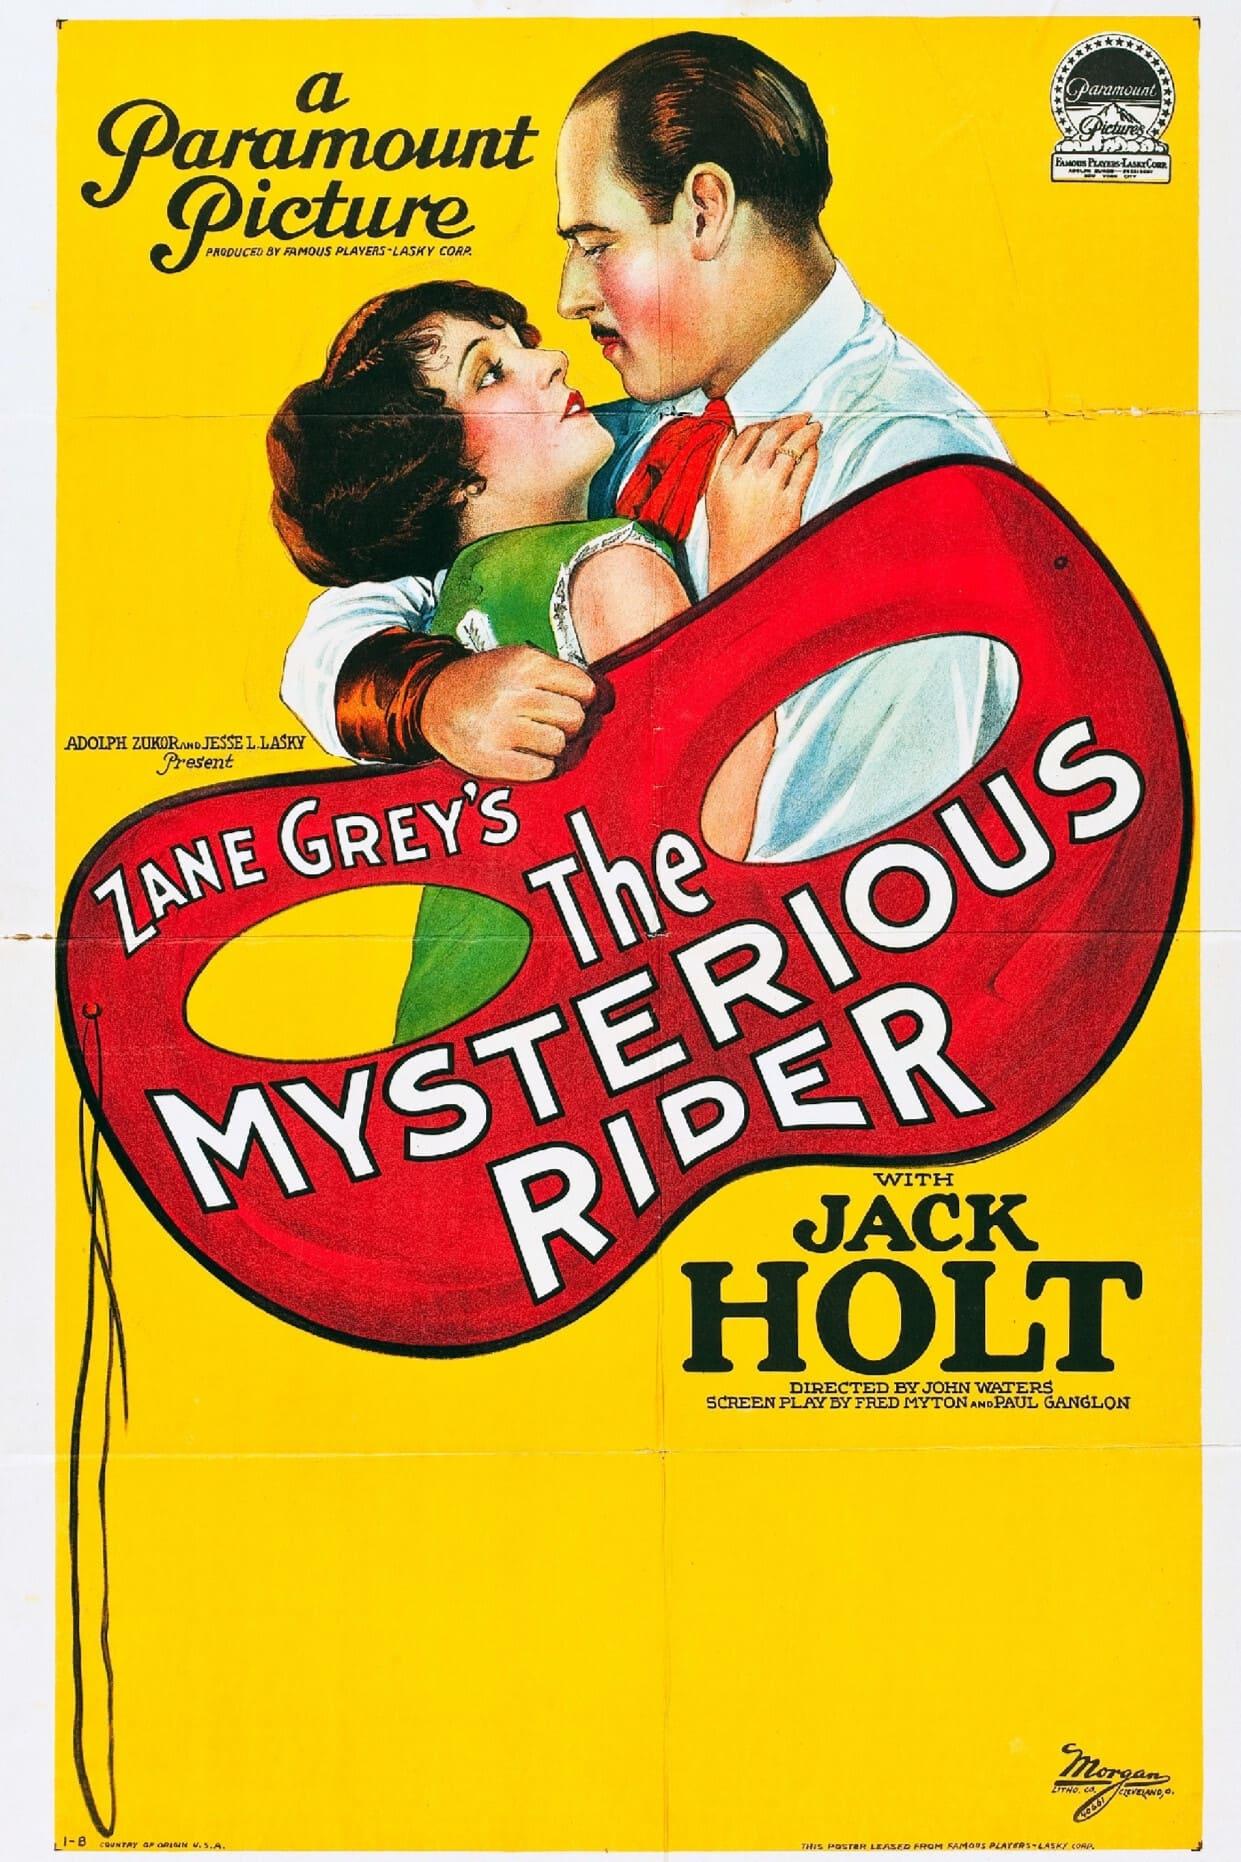 The Mysterious Rider poster